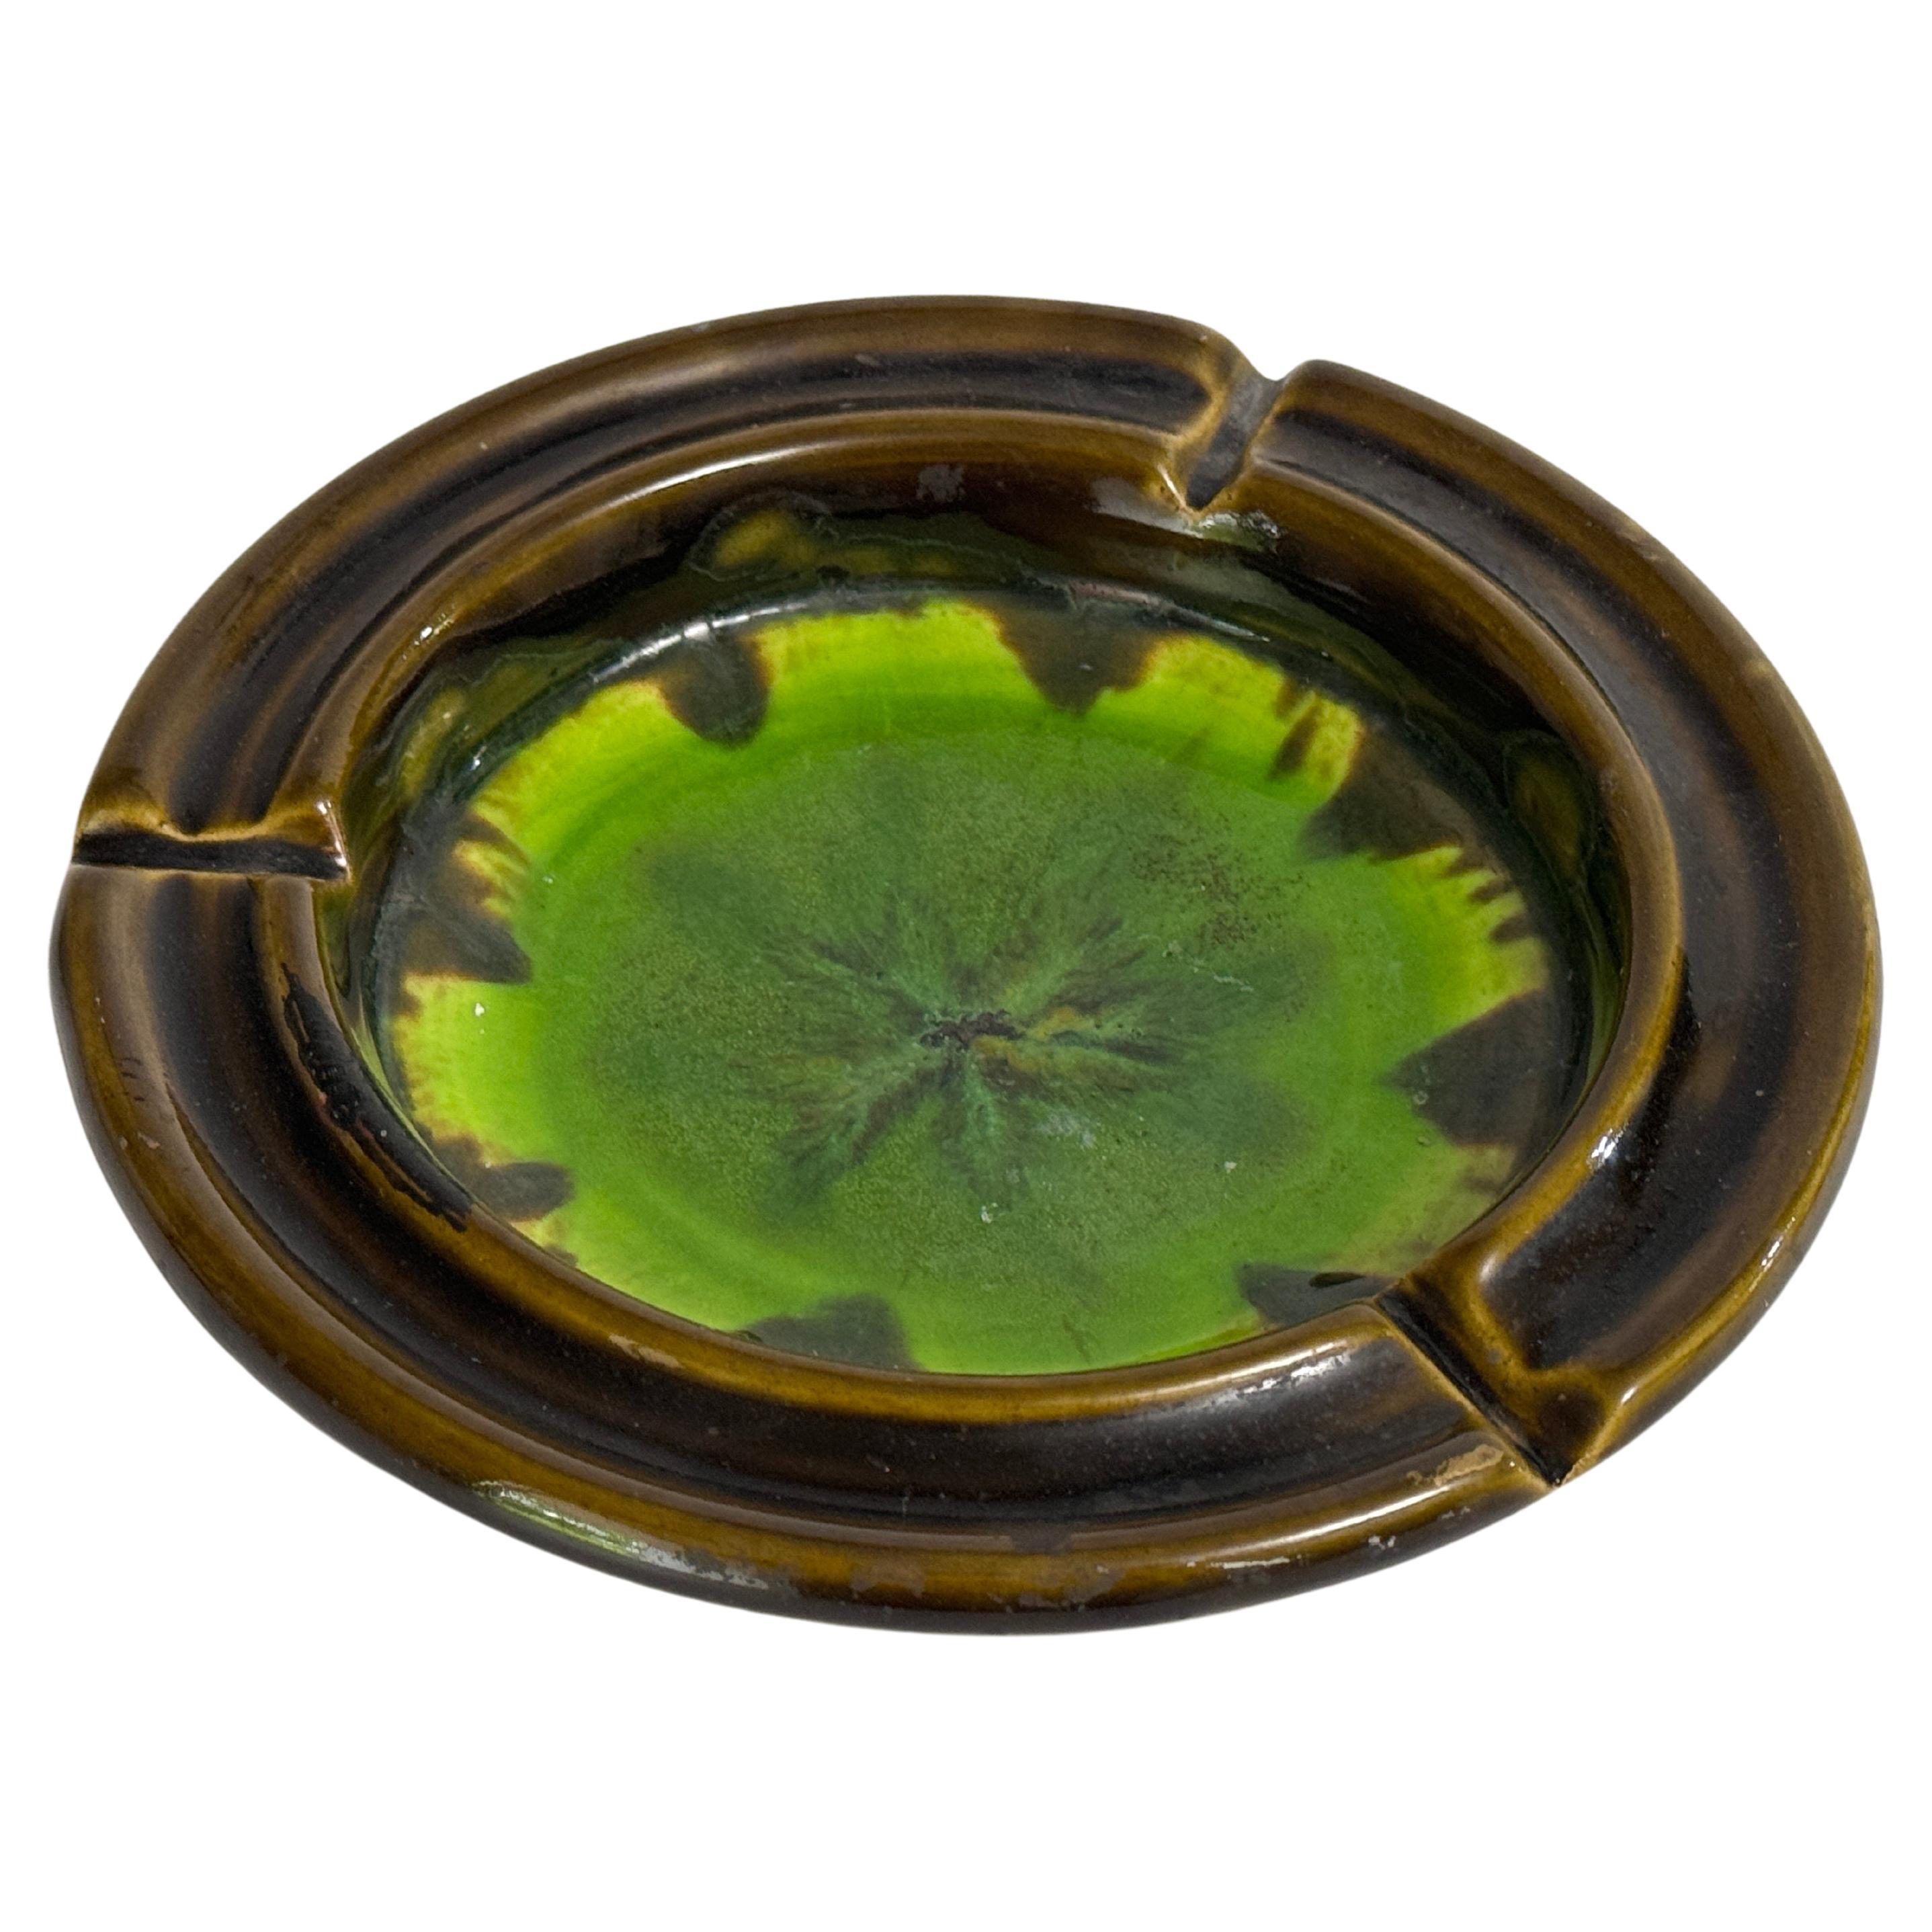 Ceramic Vide Poche from France 1960 Multicolor Color, Rond Shape Brown and Green